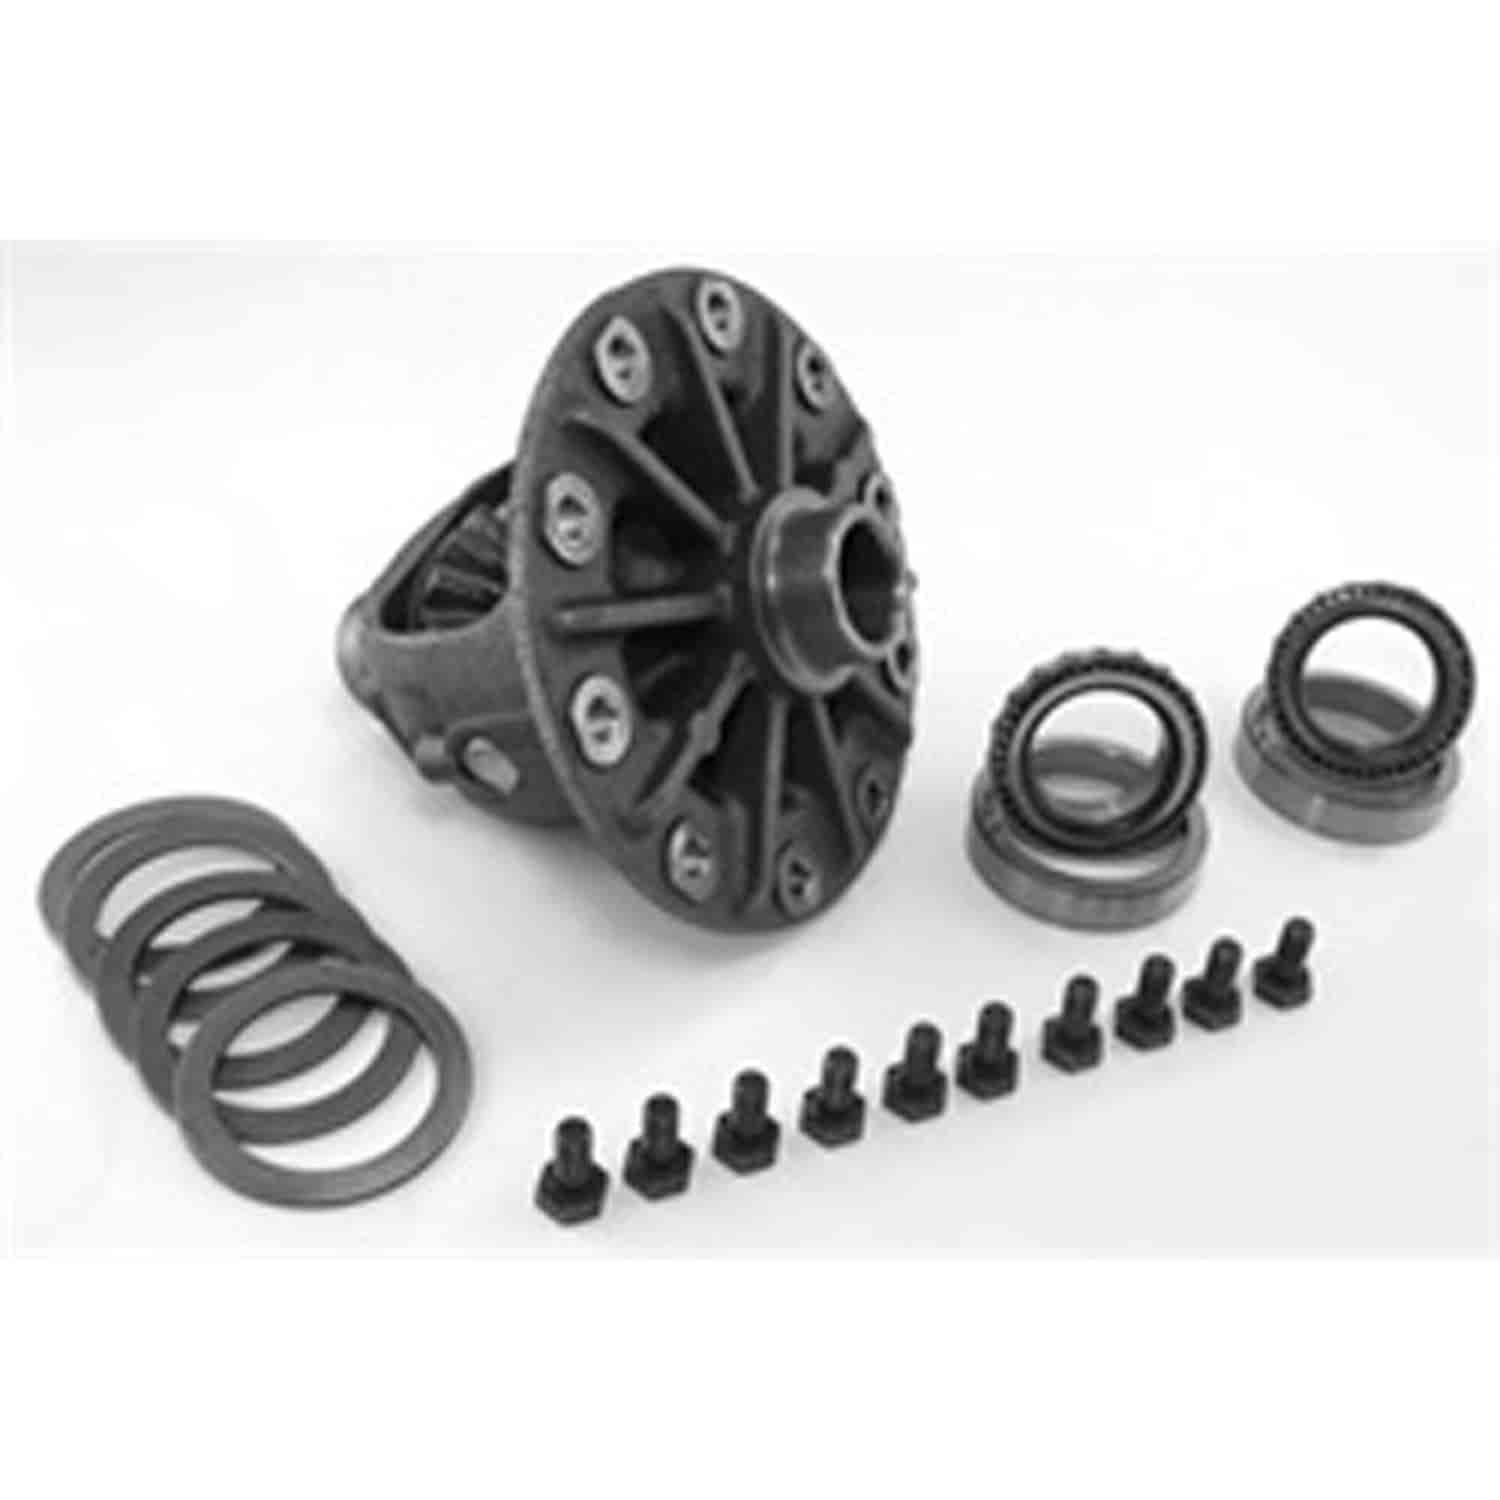 This differential case assembly kit from Omix-ADA is for Dana 44 rear 3.73 Trac-Loc after 3/29/00